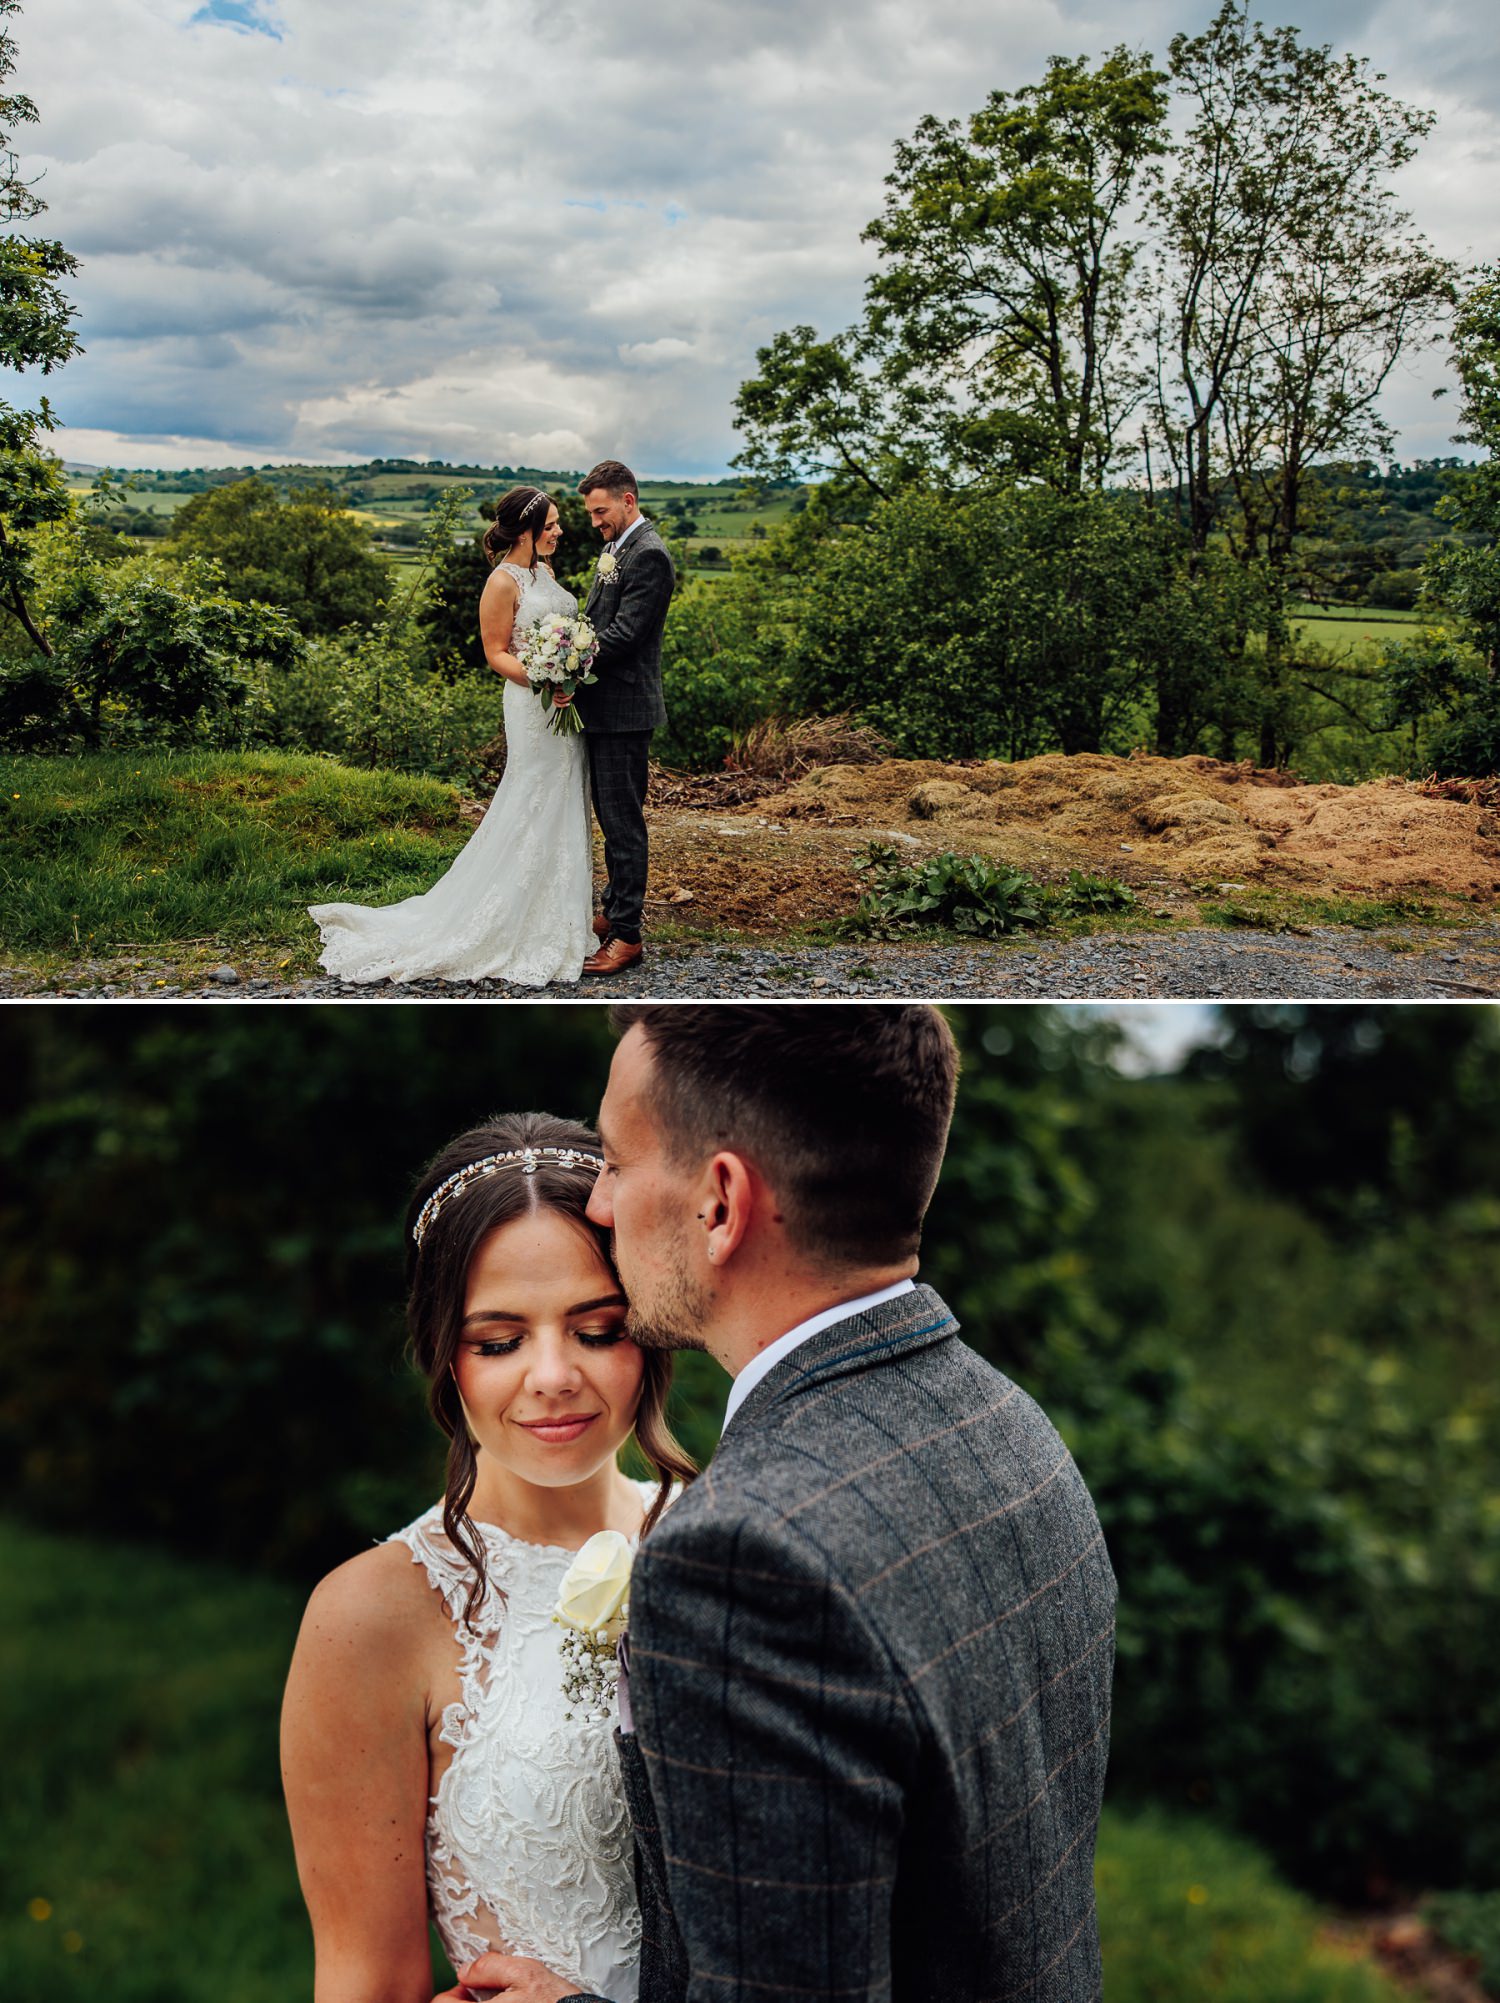 Couple portraits of bride and groom